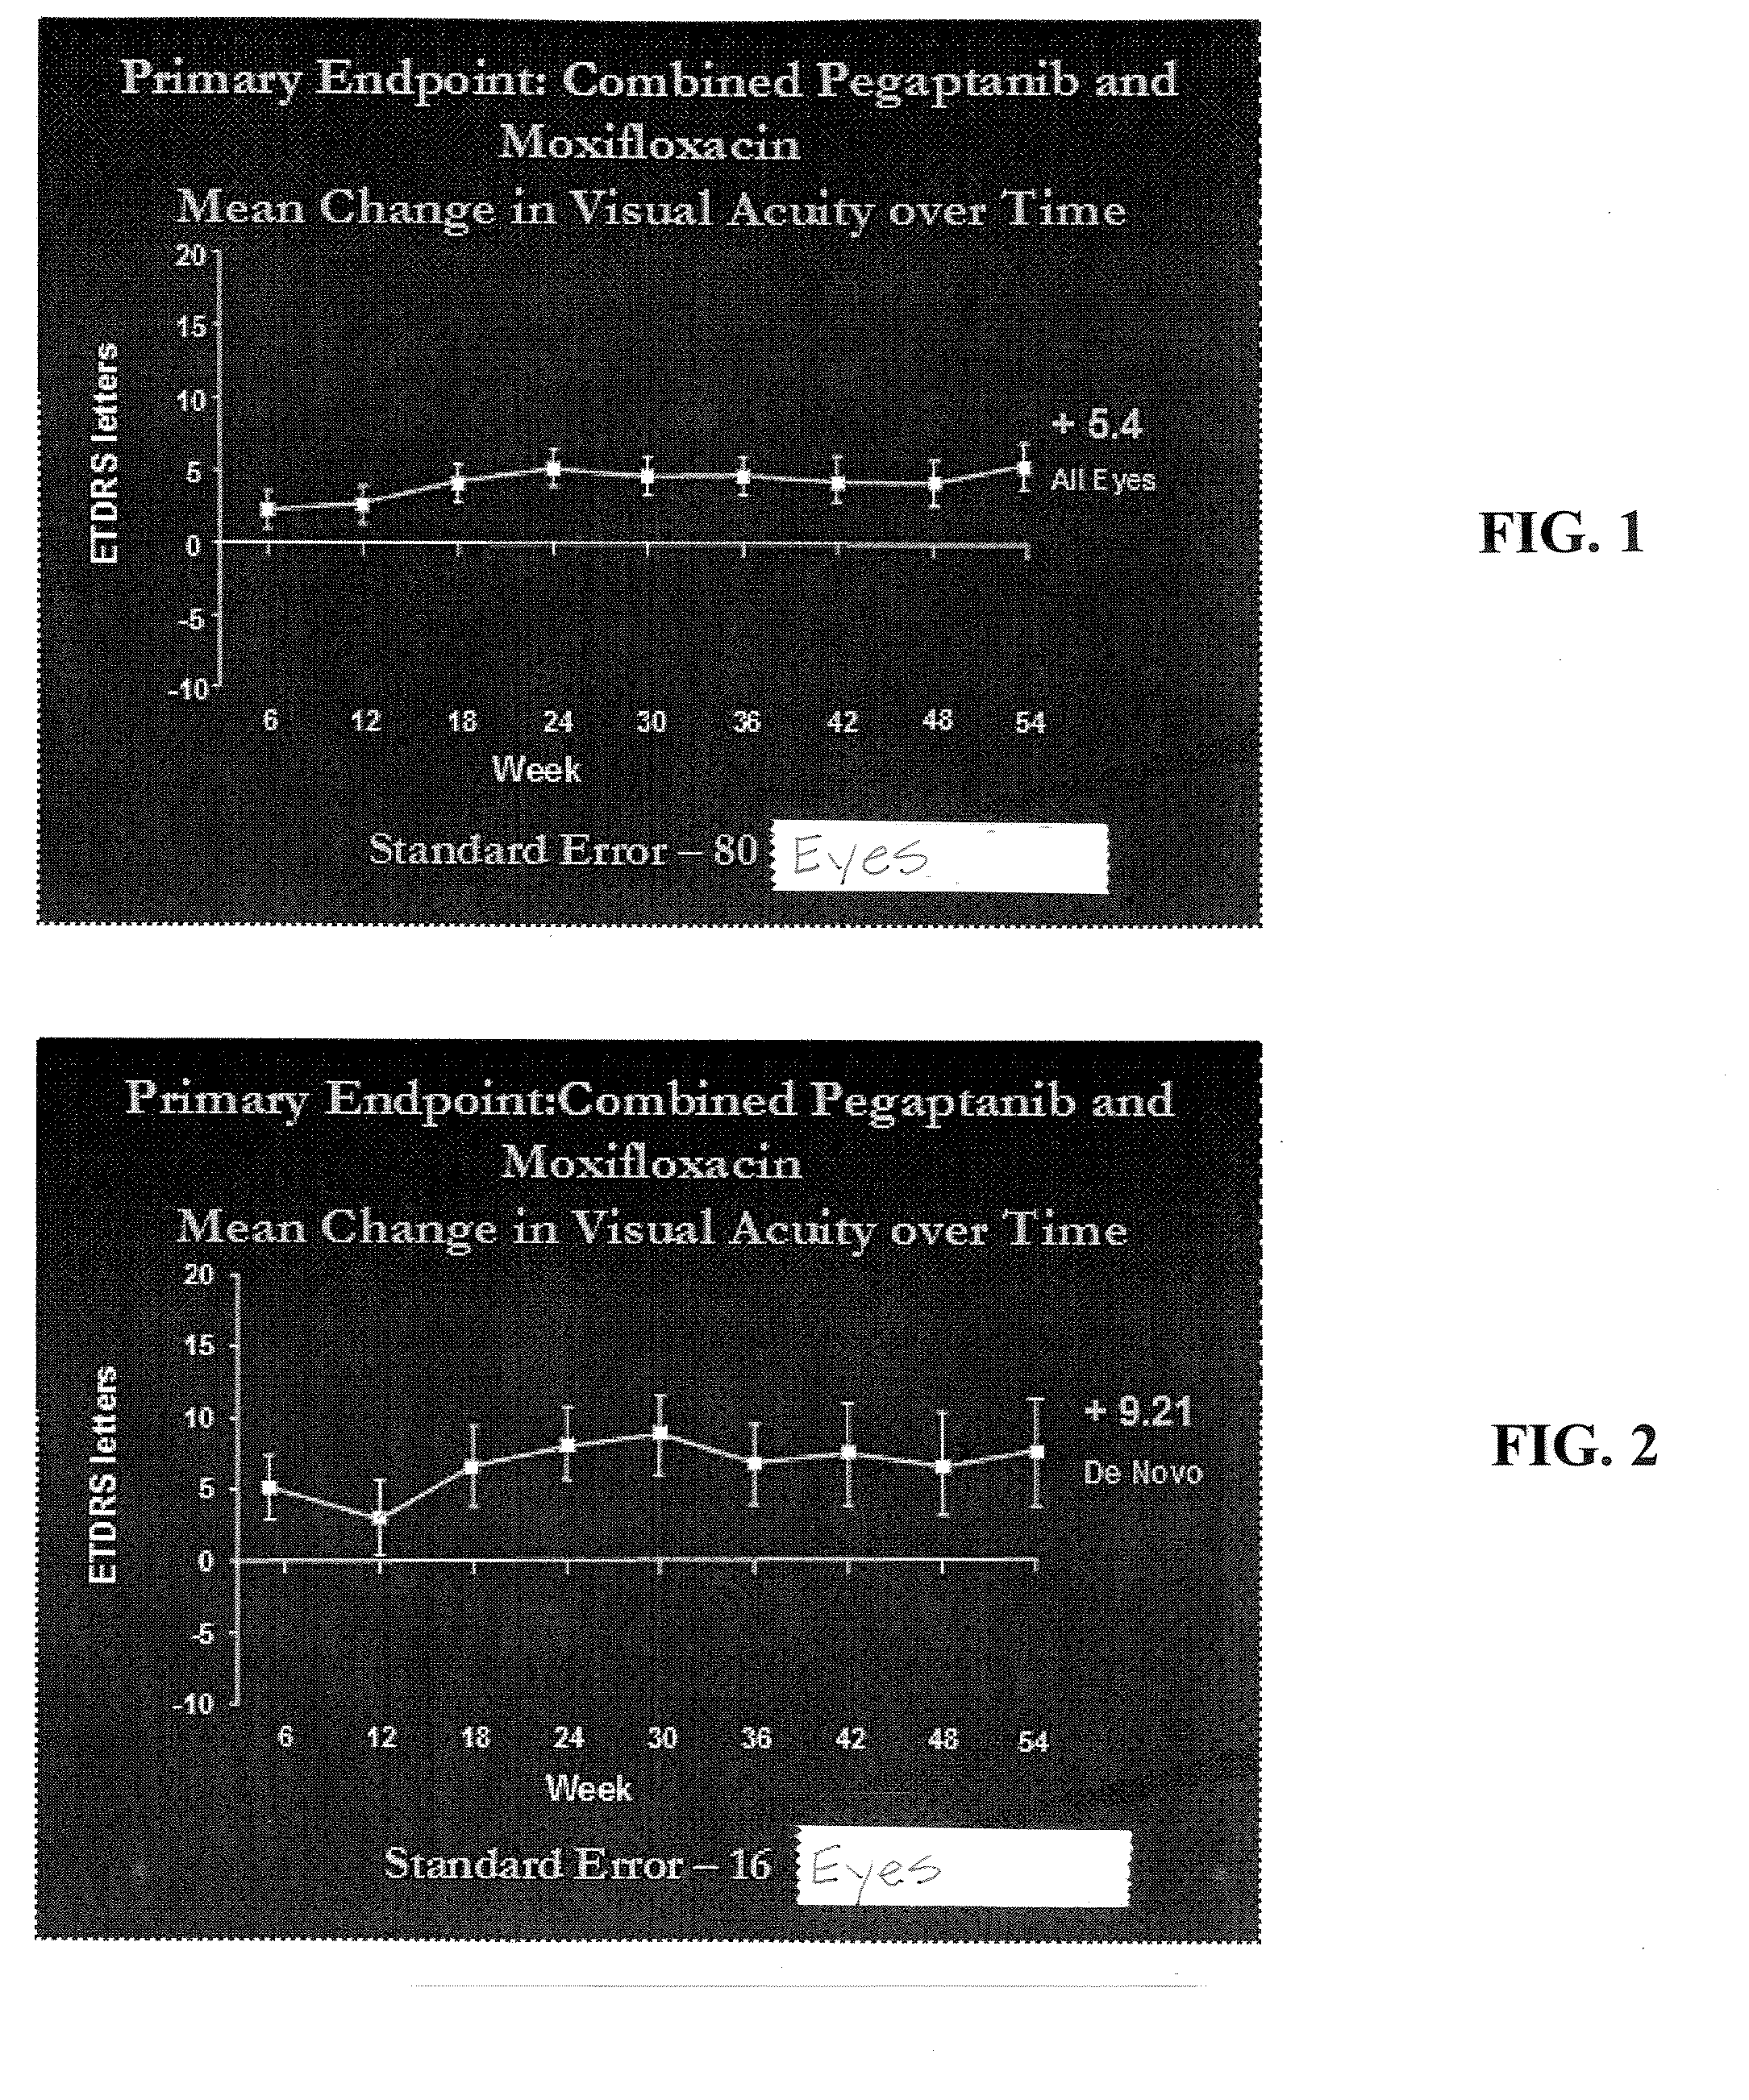 Process for use of fluoroquinolones to reduce or modulate inflammation due to eye disease or ophthalmic surgery